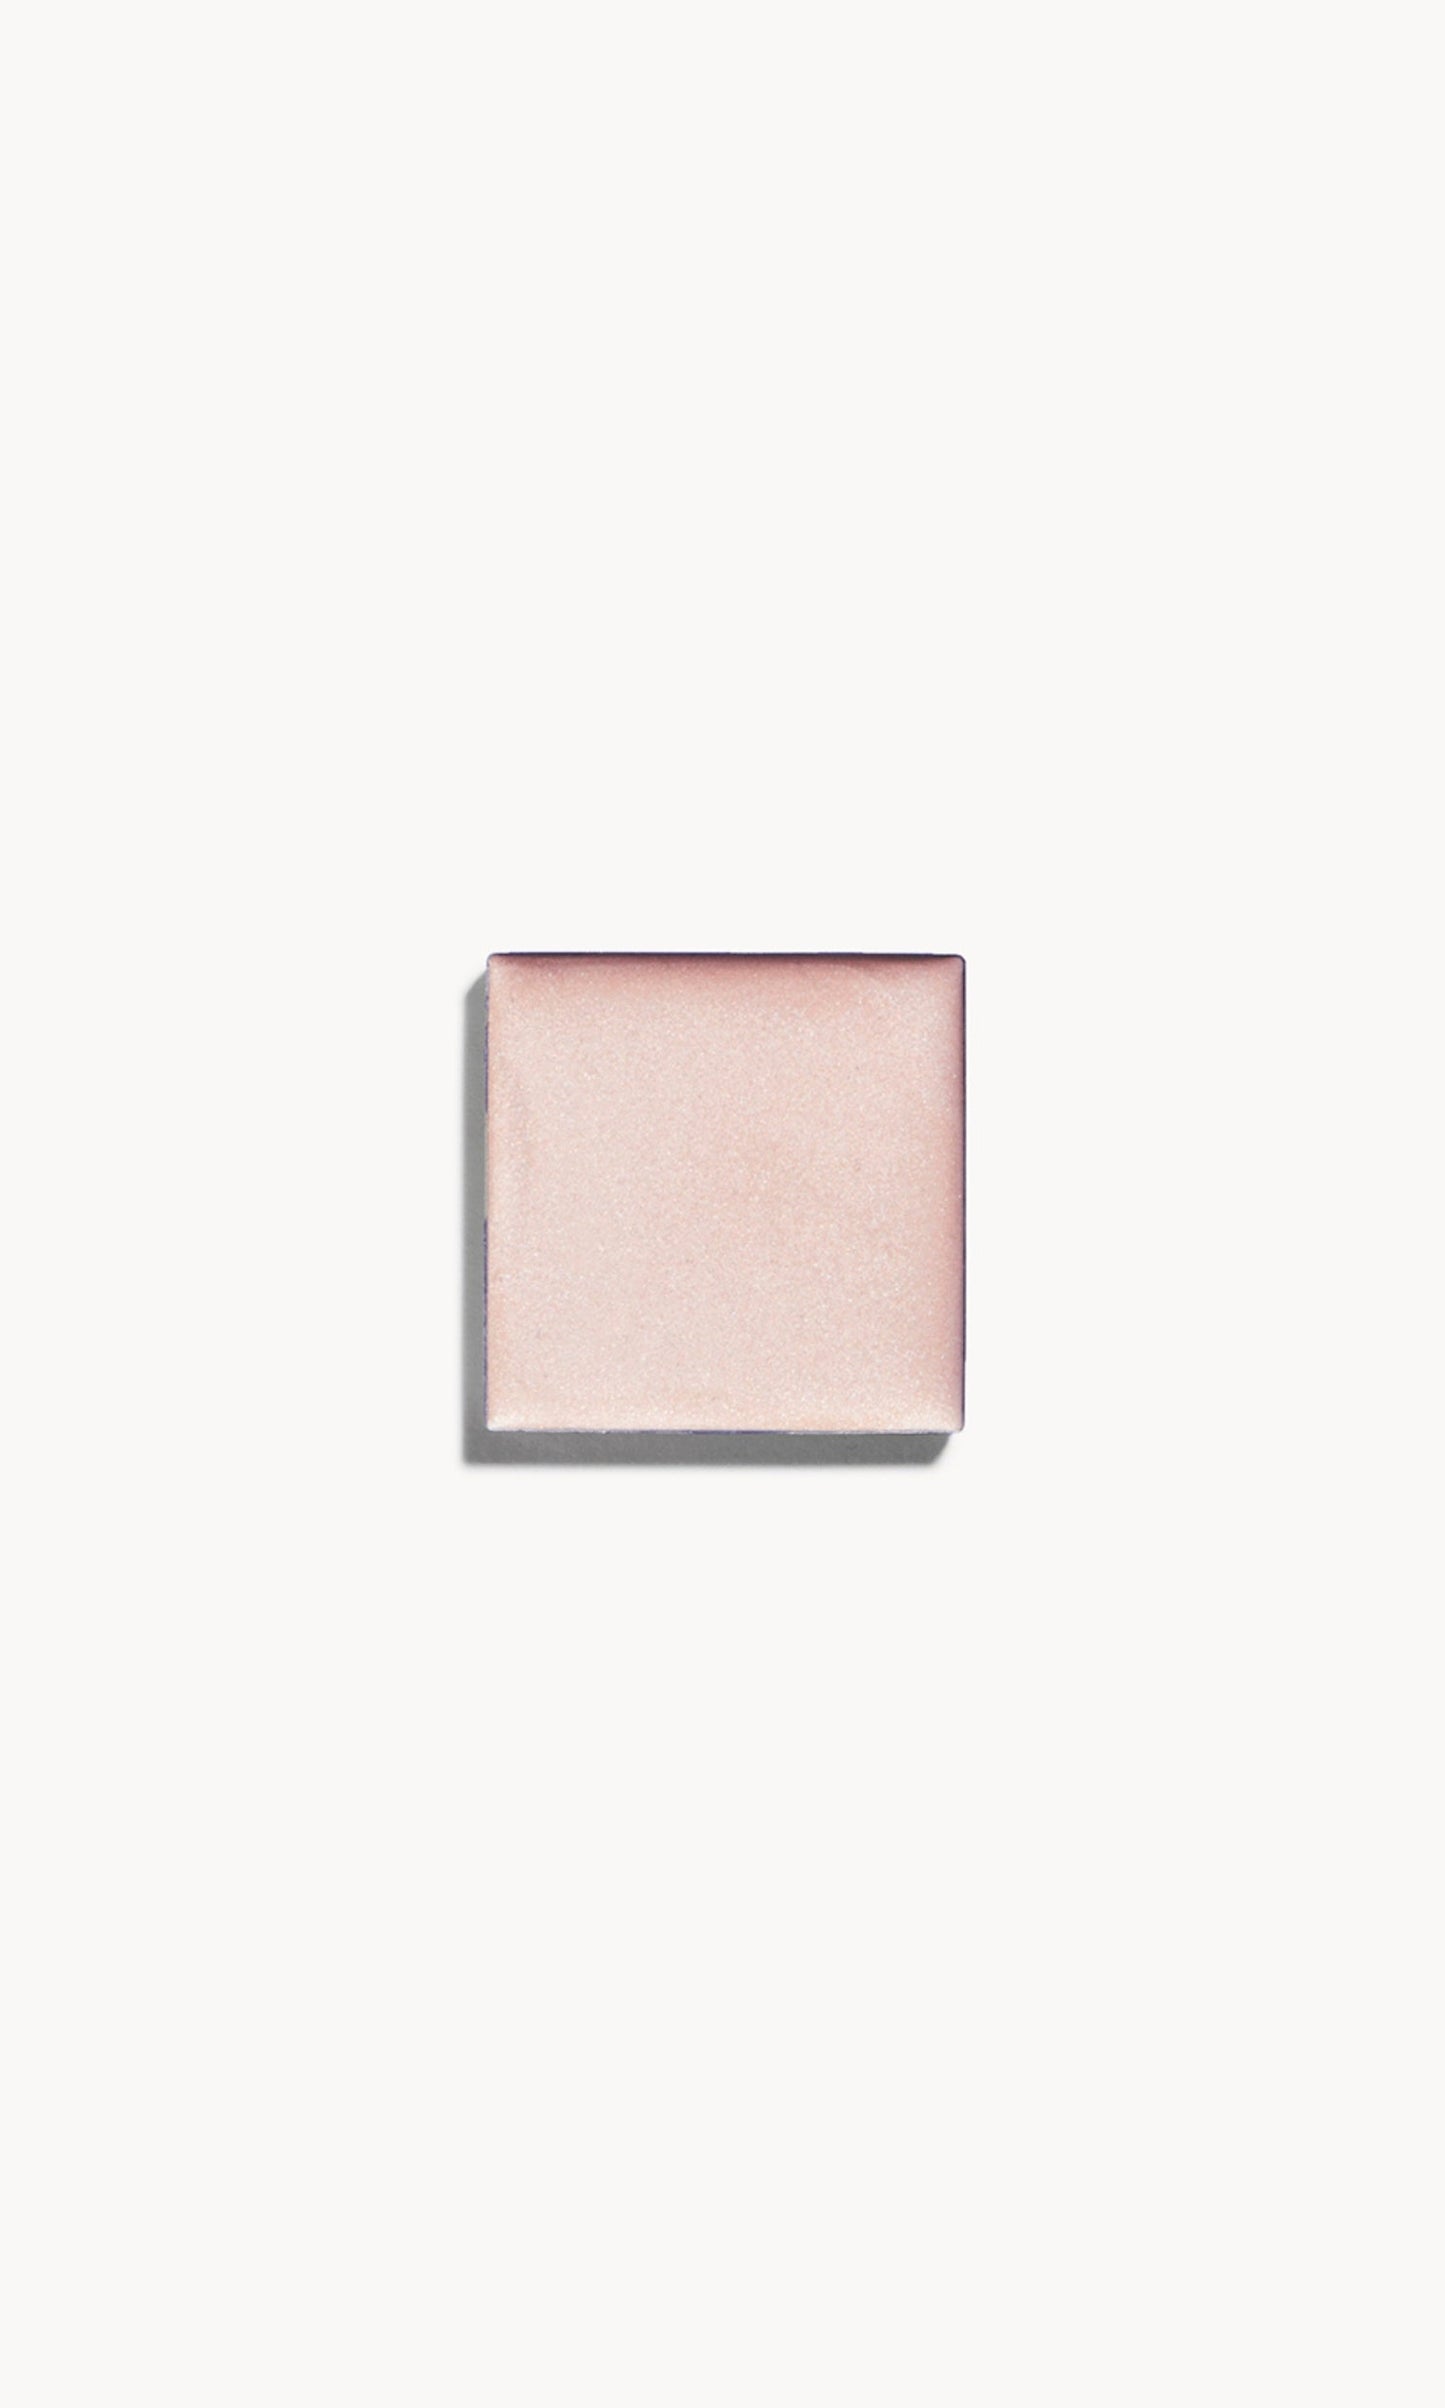 A square of cool silvery-pearl cream highlighter on a white background